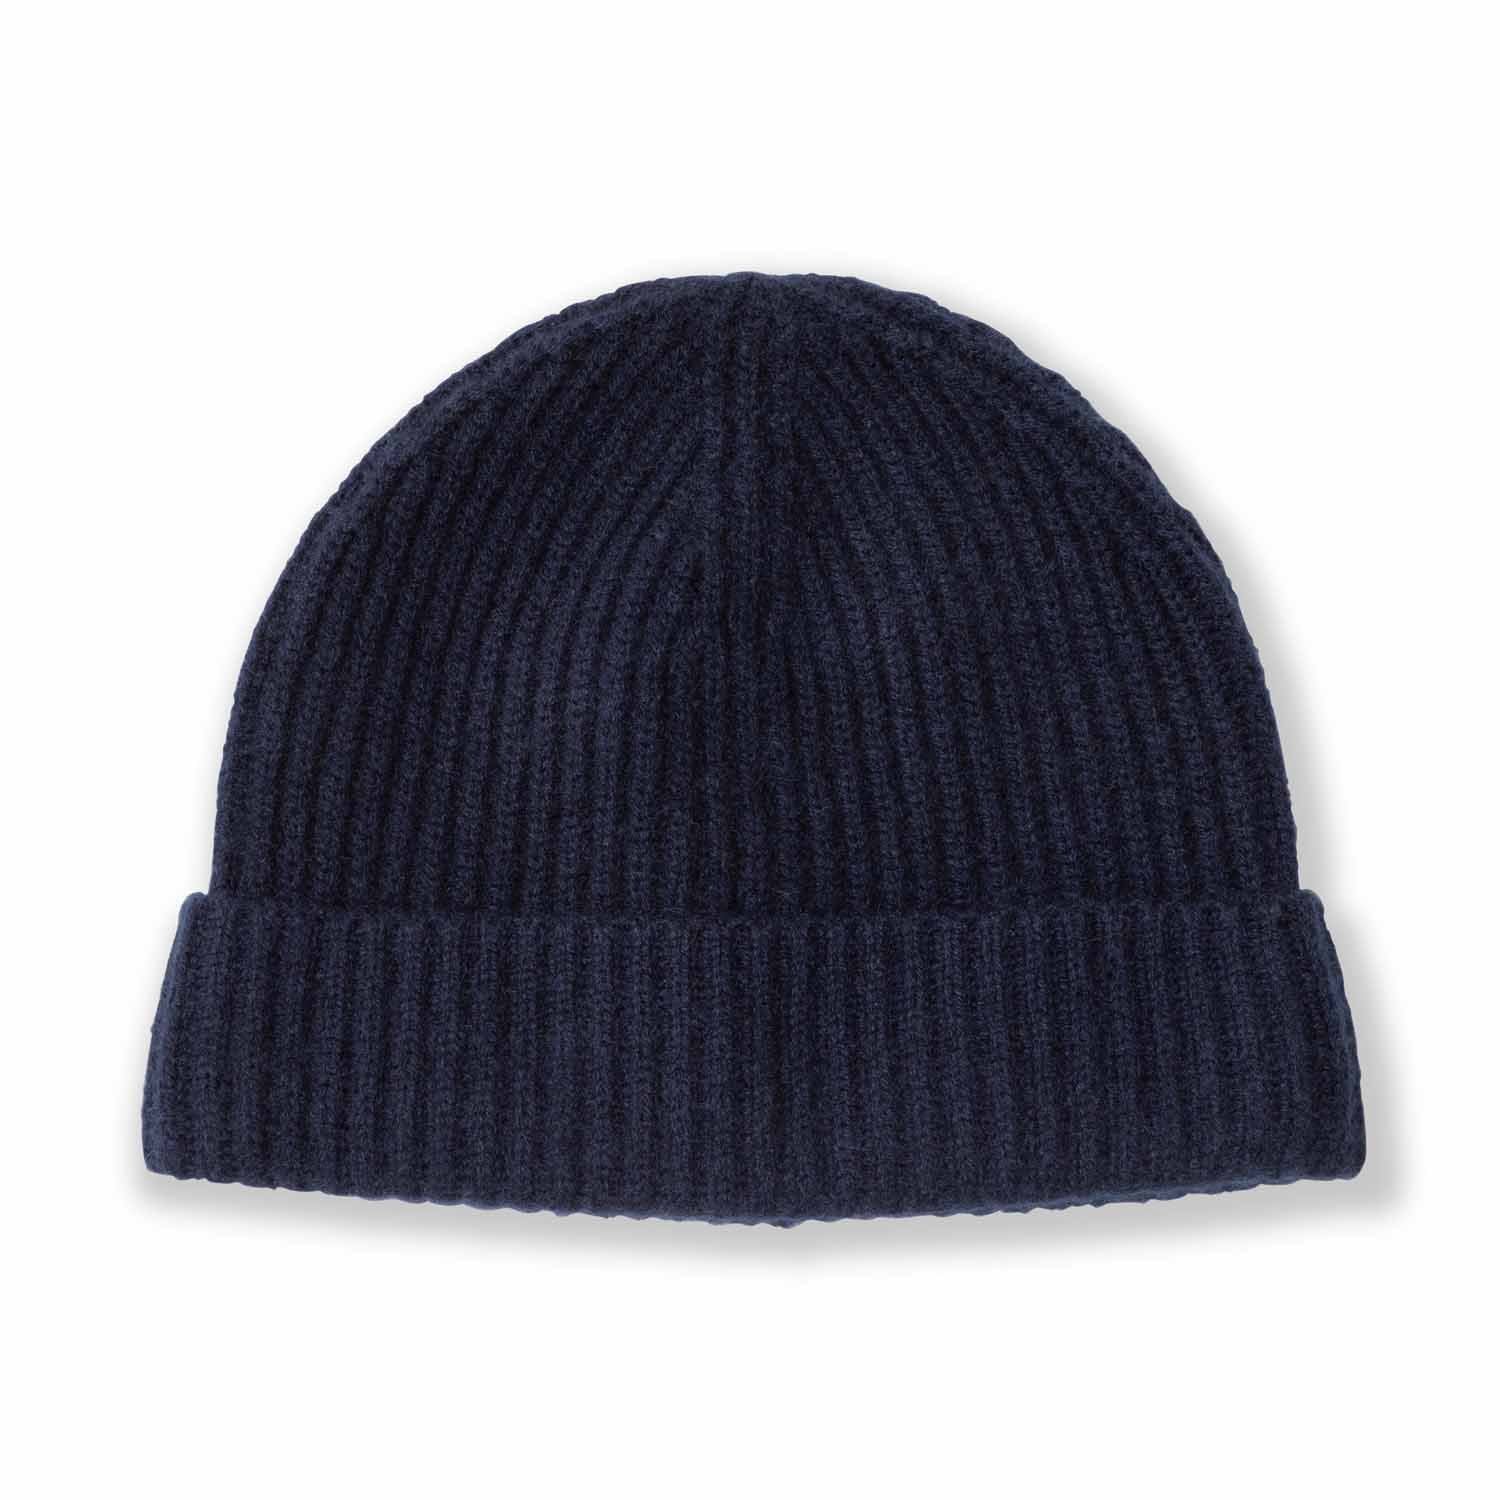 Picture of a man wearing acashmere cardigan rib knit hat in navy.